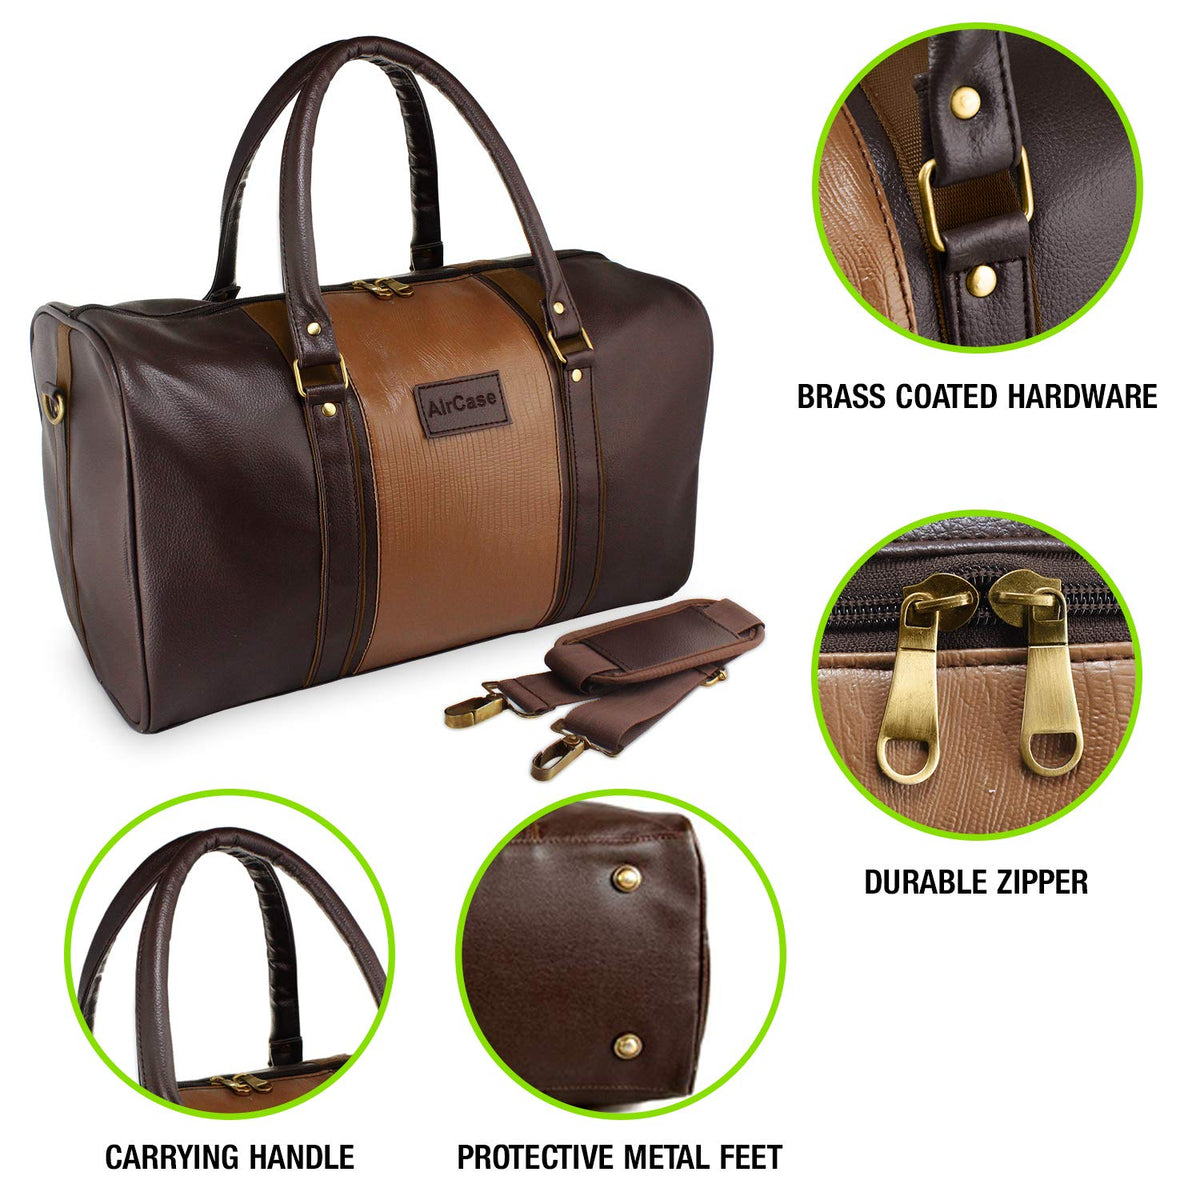 Vegan Leather Bags: Buy Online at Best Price in India - AirCase